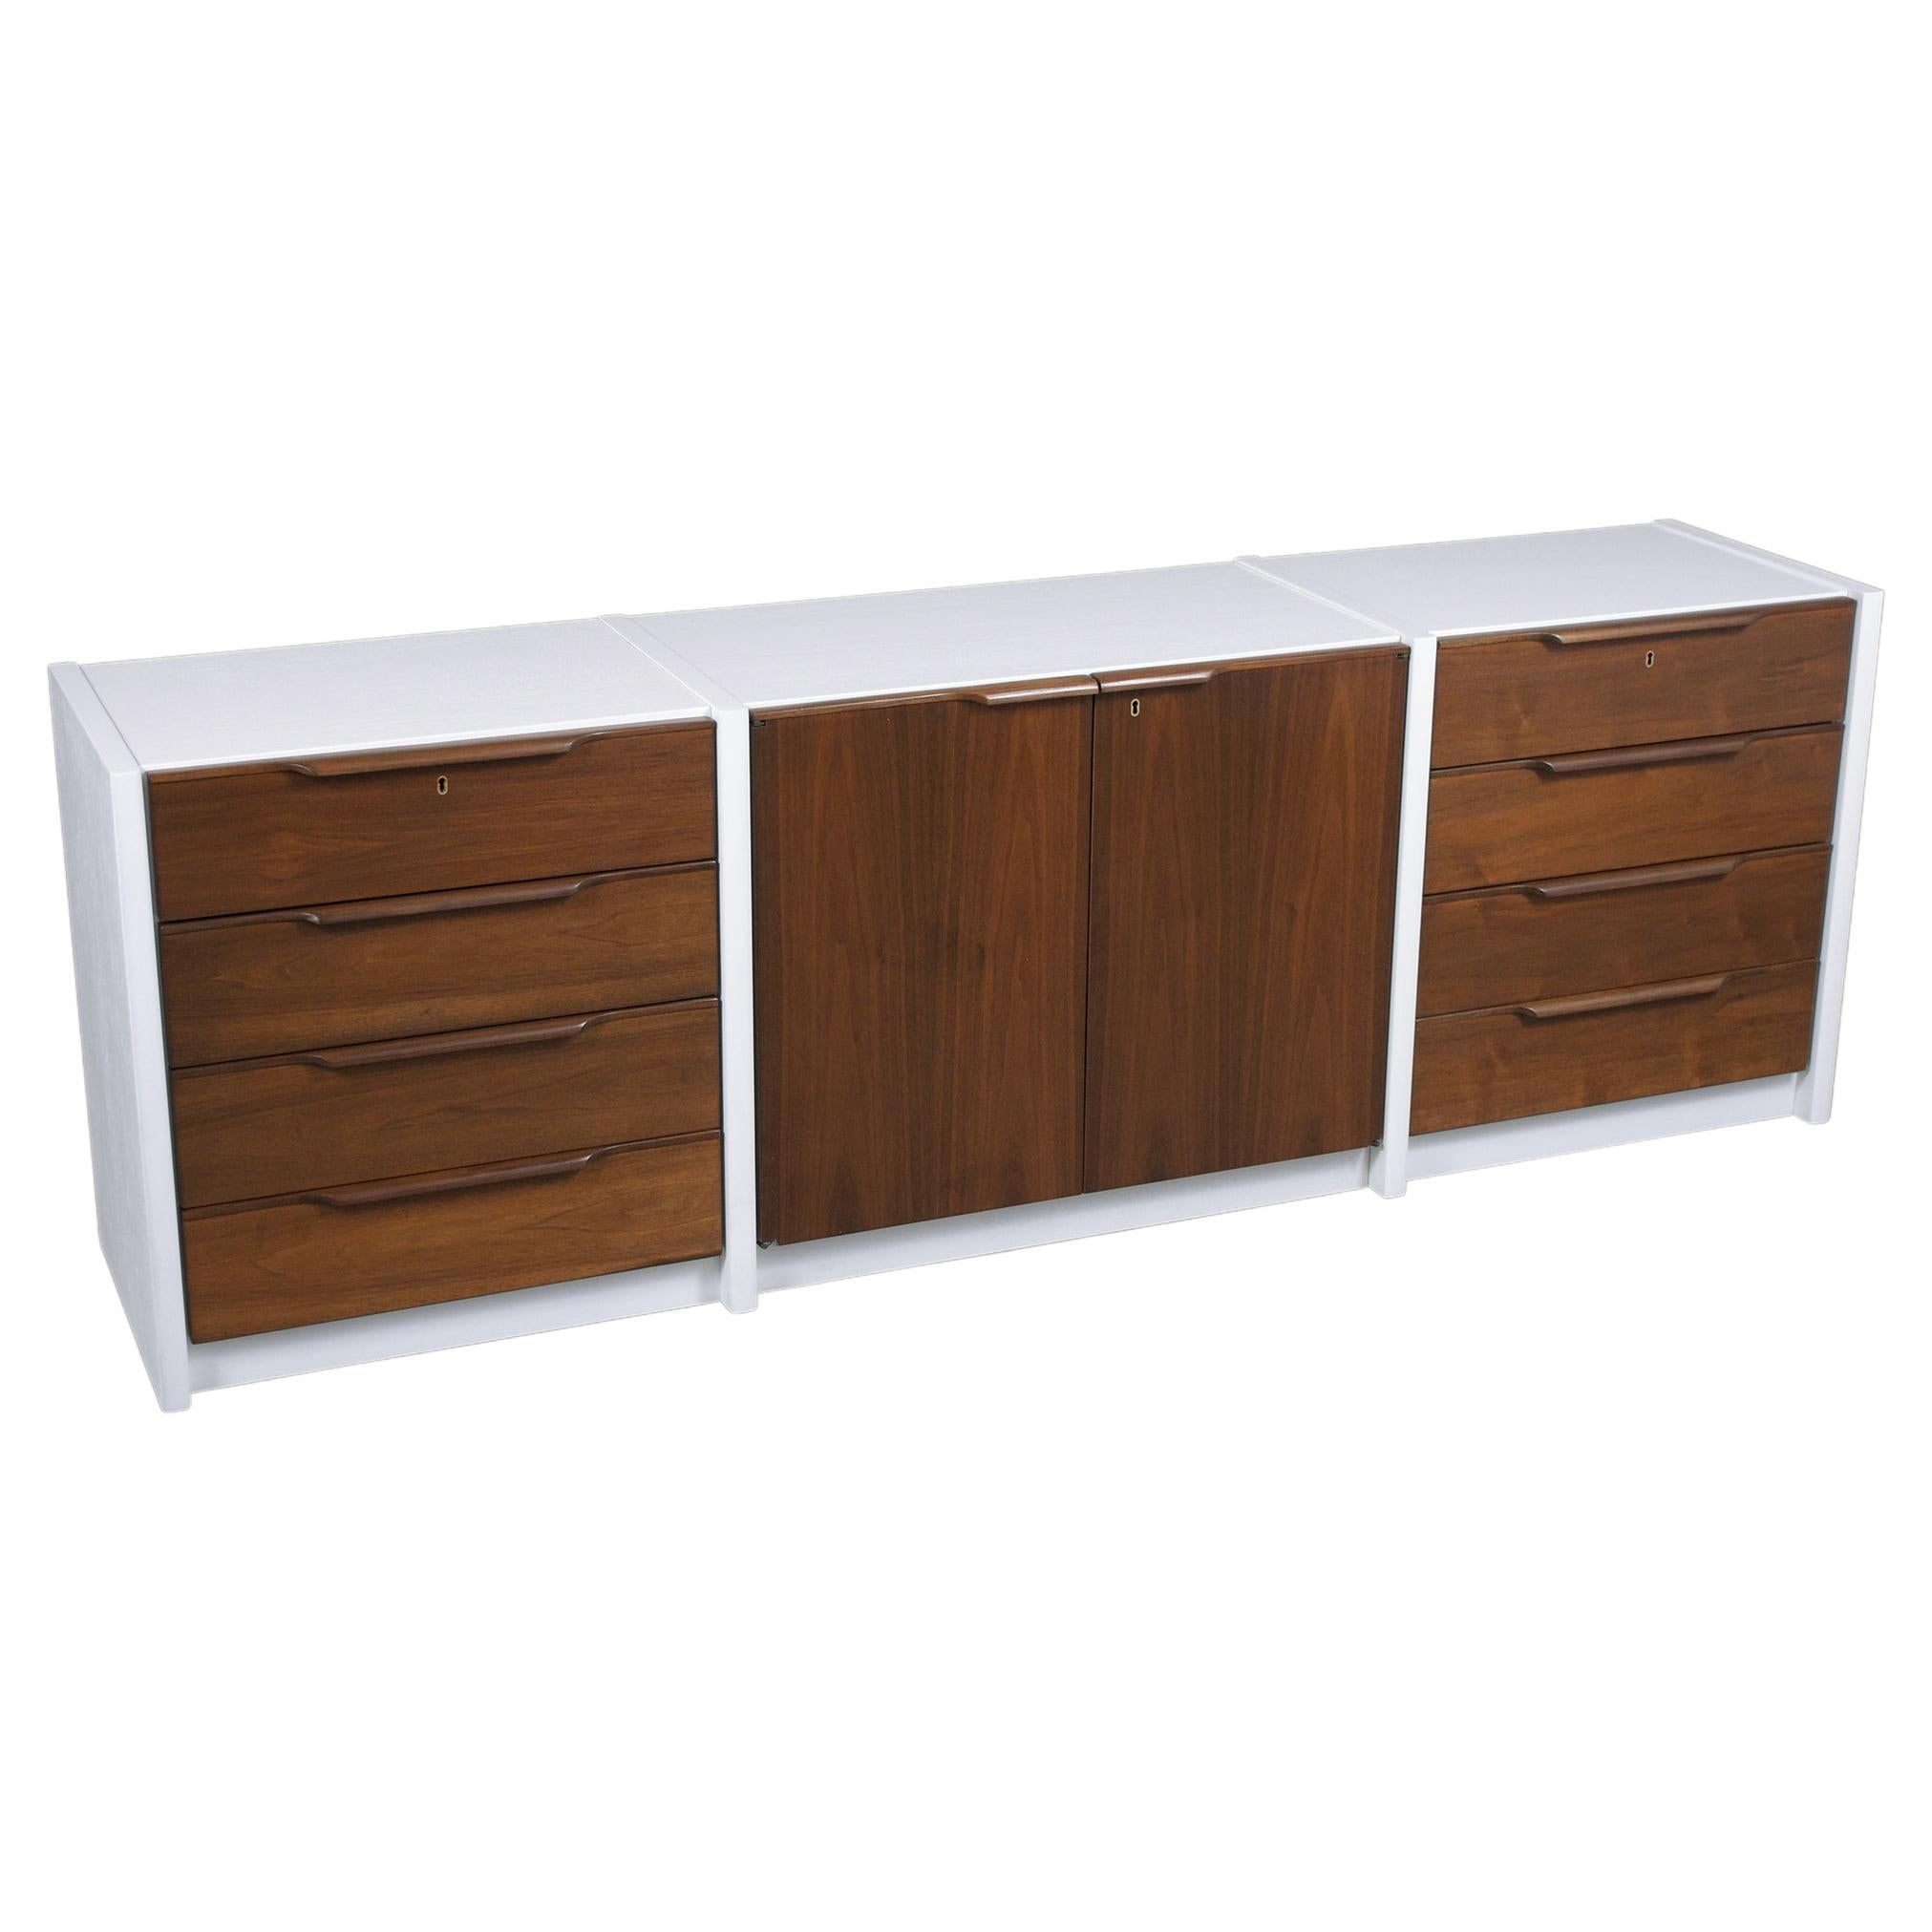 Vintage 1960s Danish Walnut Executive Cabinet - Newly Restored with Modern Flair